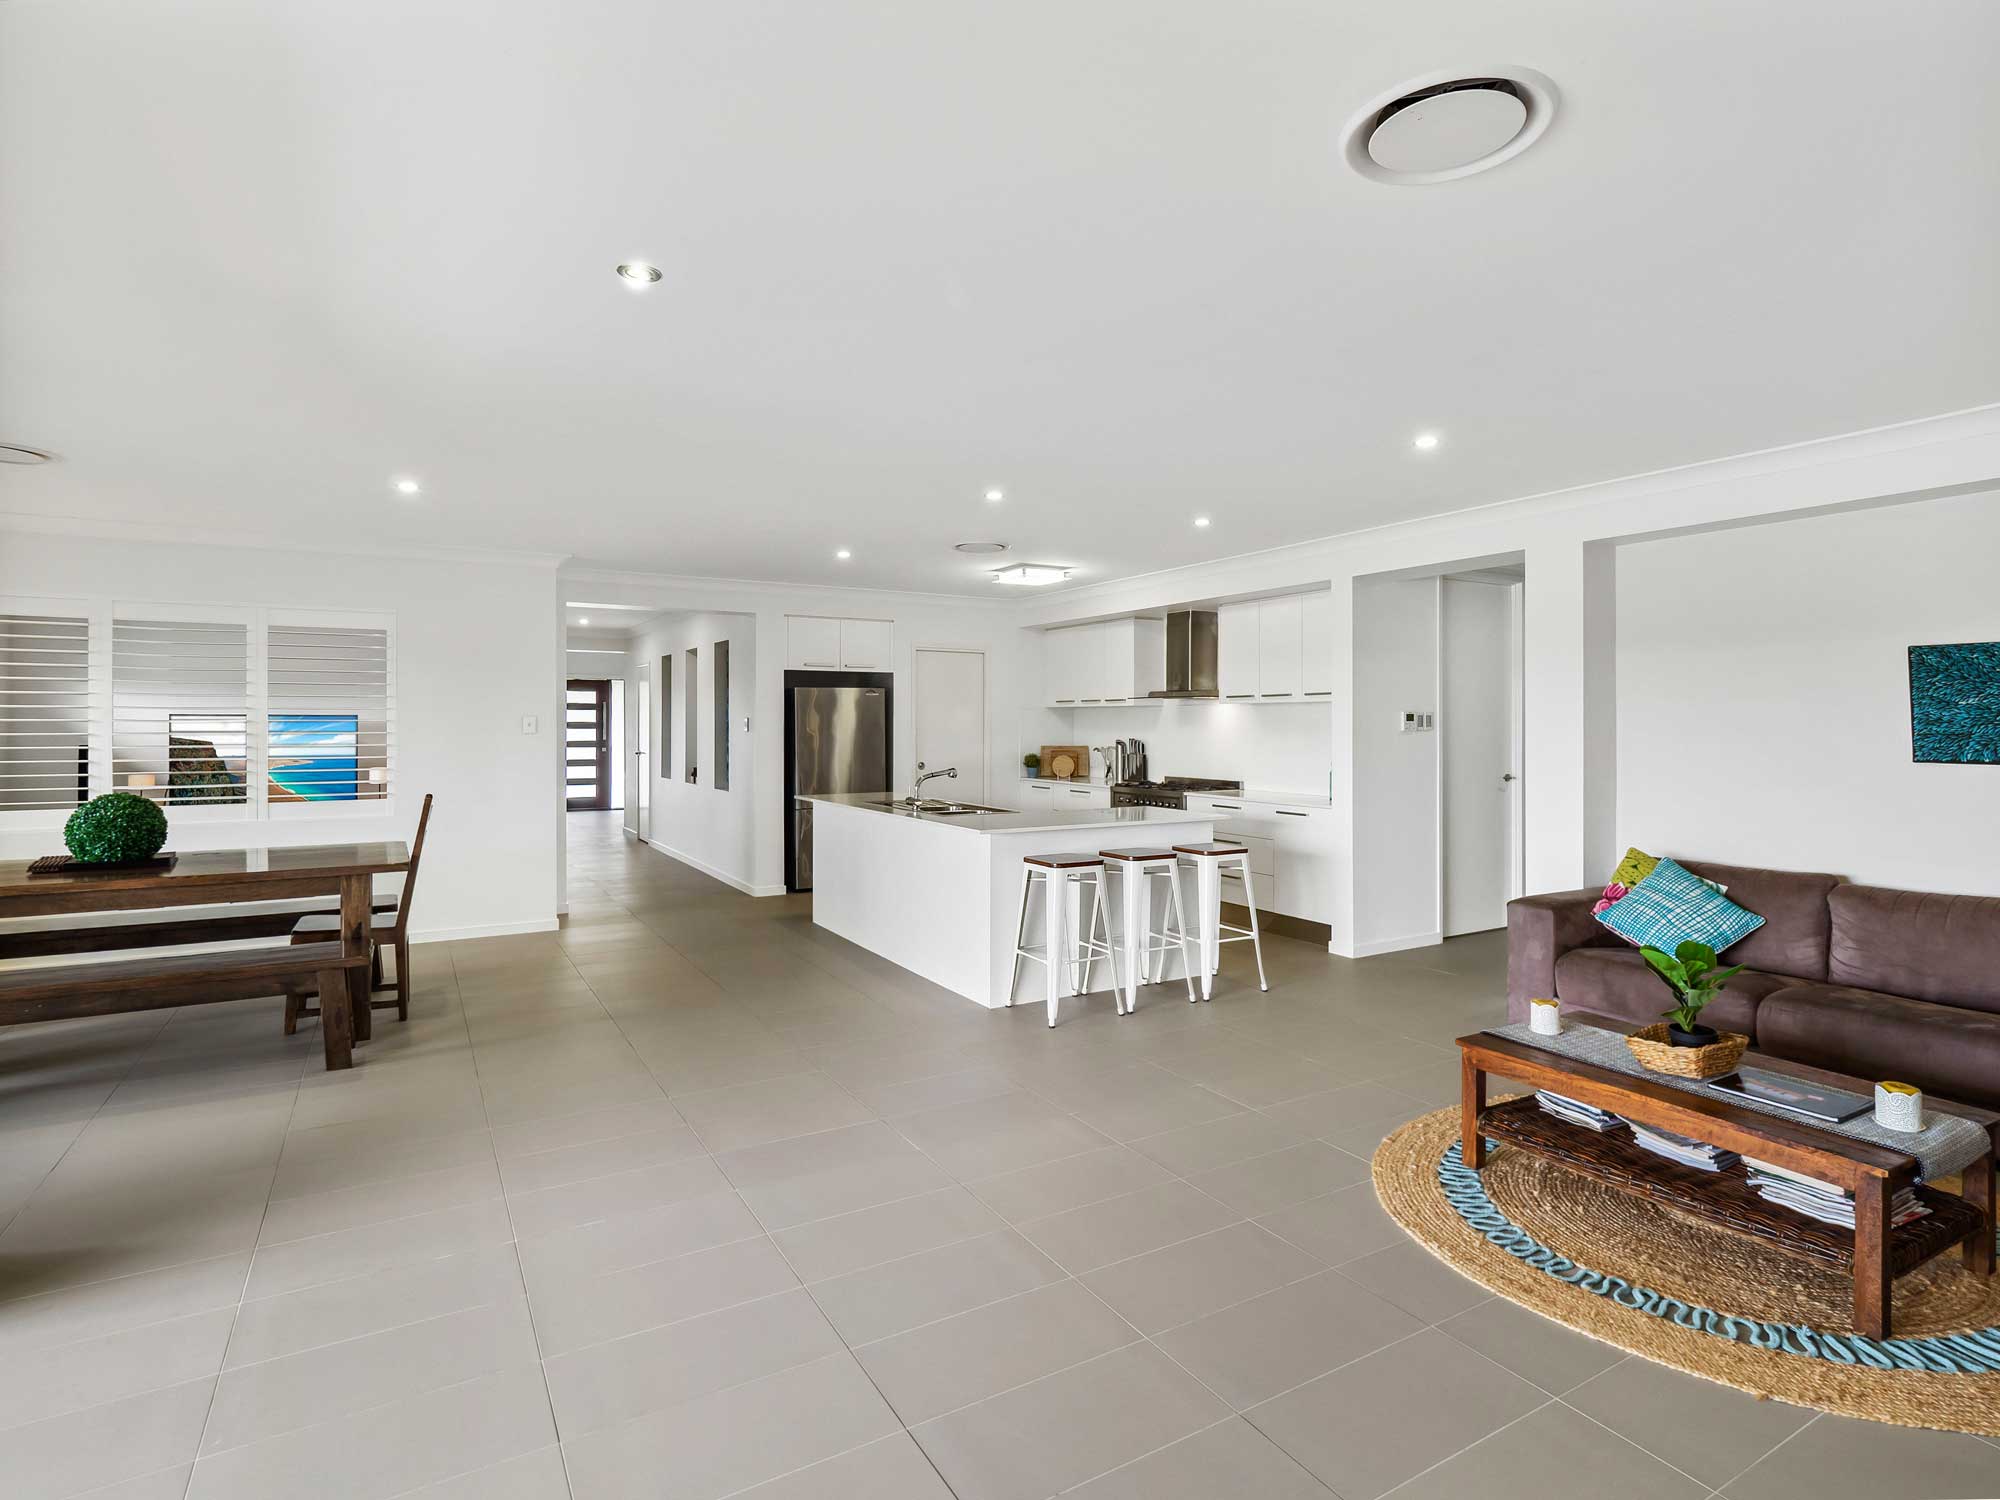  Real estate photography for a new home listing at Cashmere, Brisbane north side